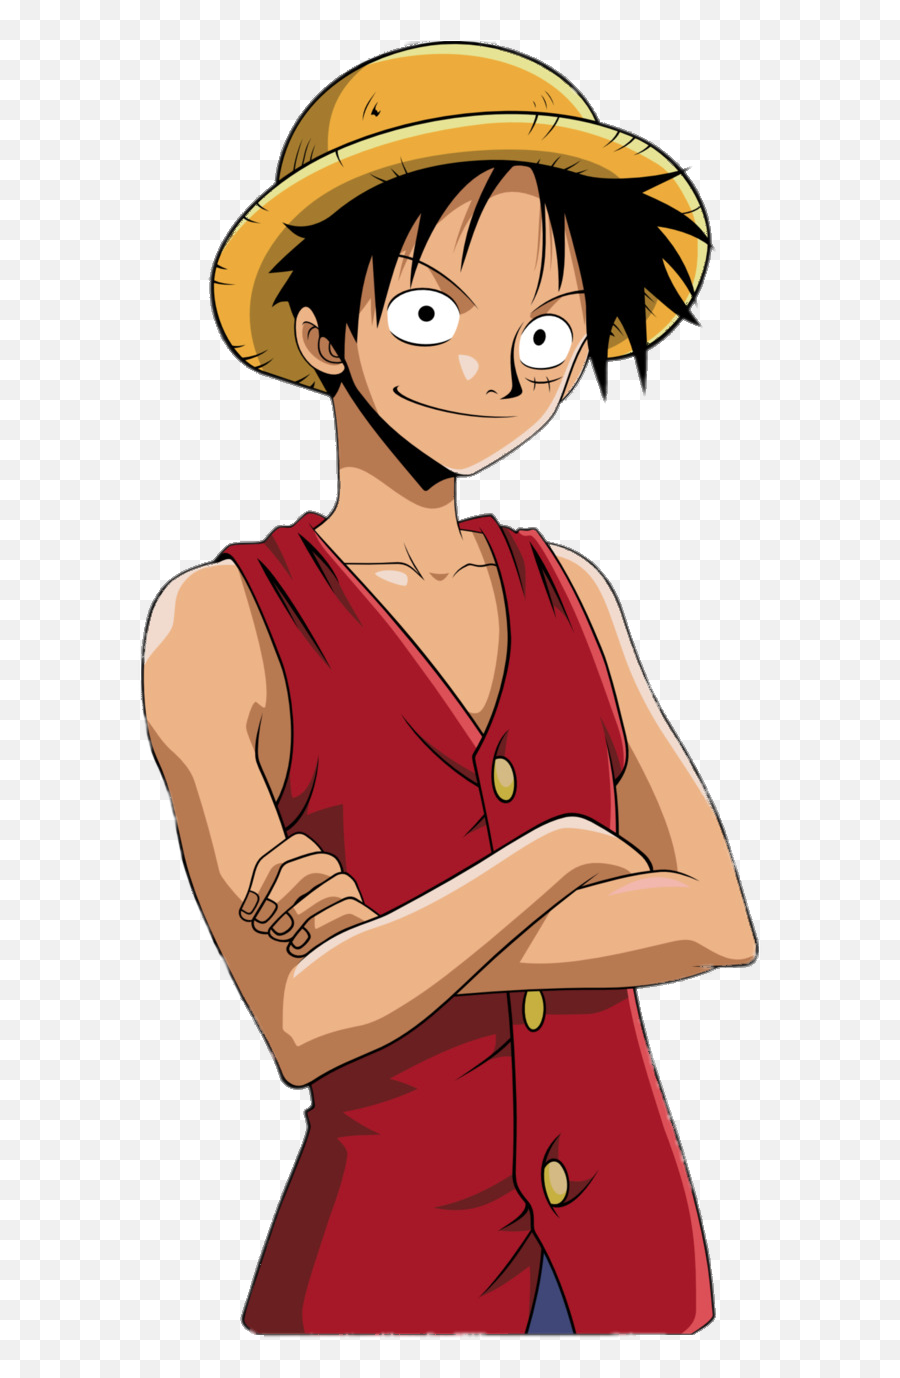 Check Out This Transparent One Piece Monkey D Luffy Arms Emoji,Arms Transparent